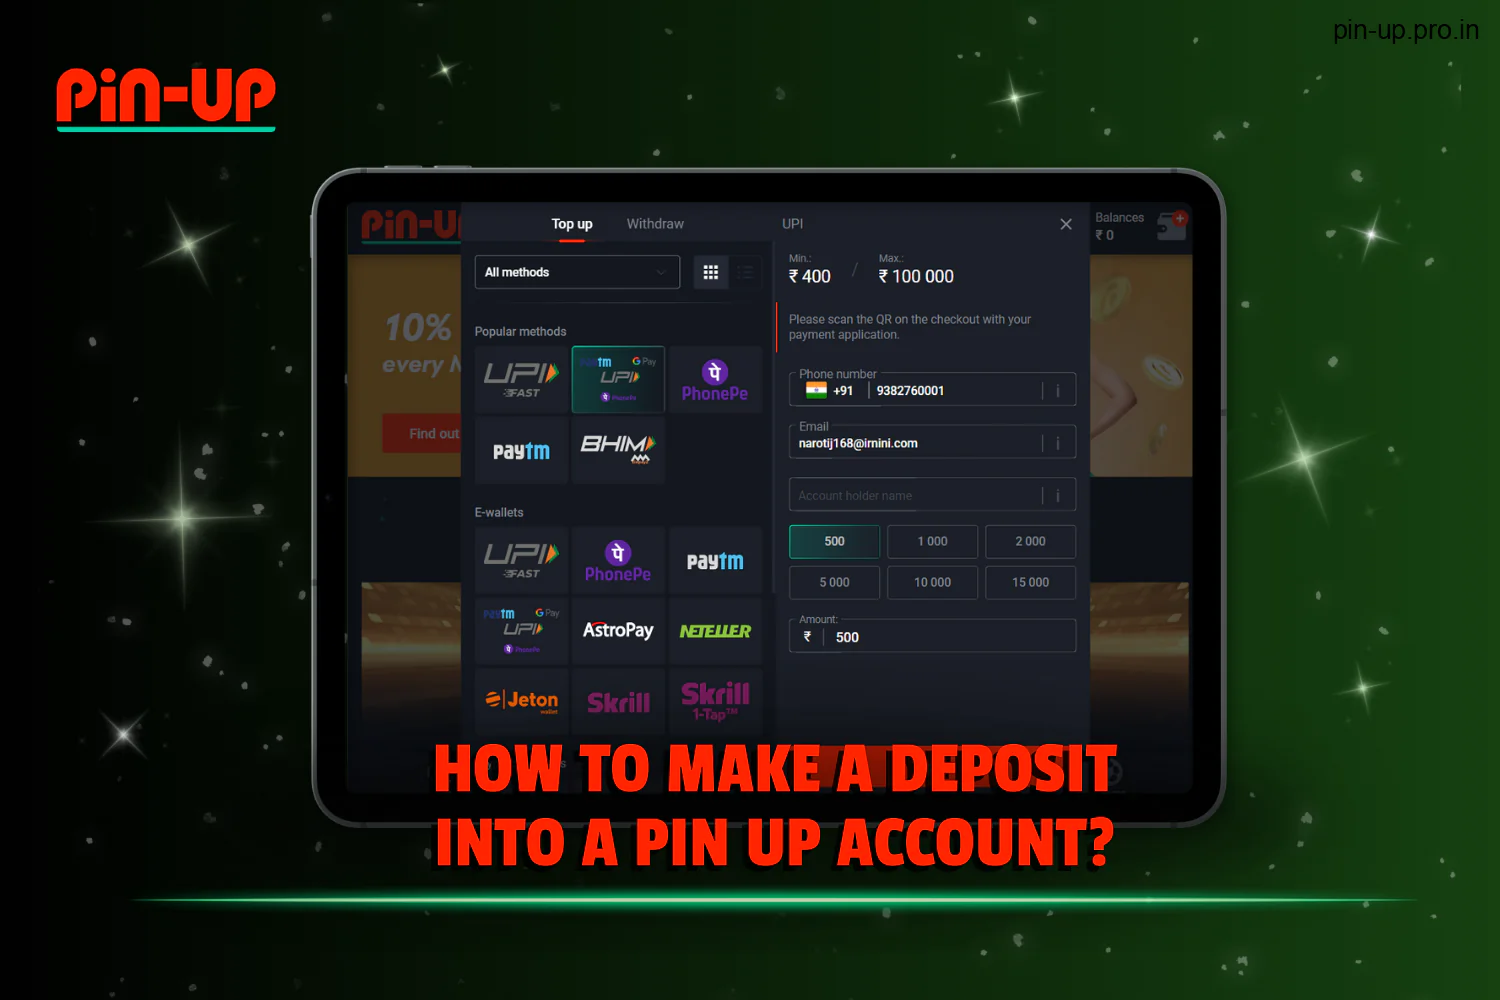 Indian Pin Up users have a variety of options available for depositing funds into their gaming accounts